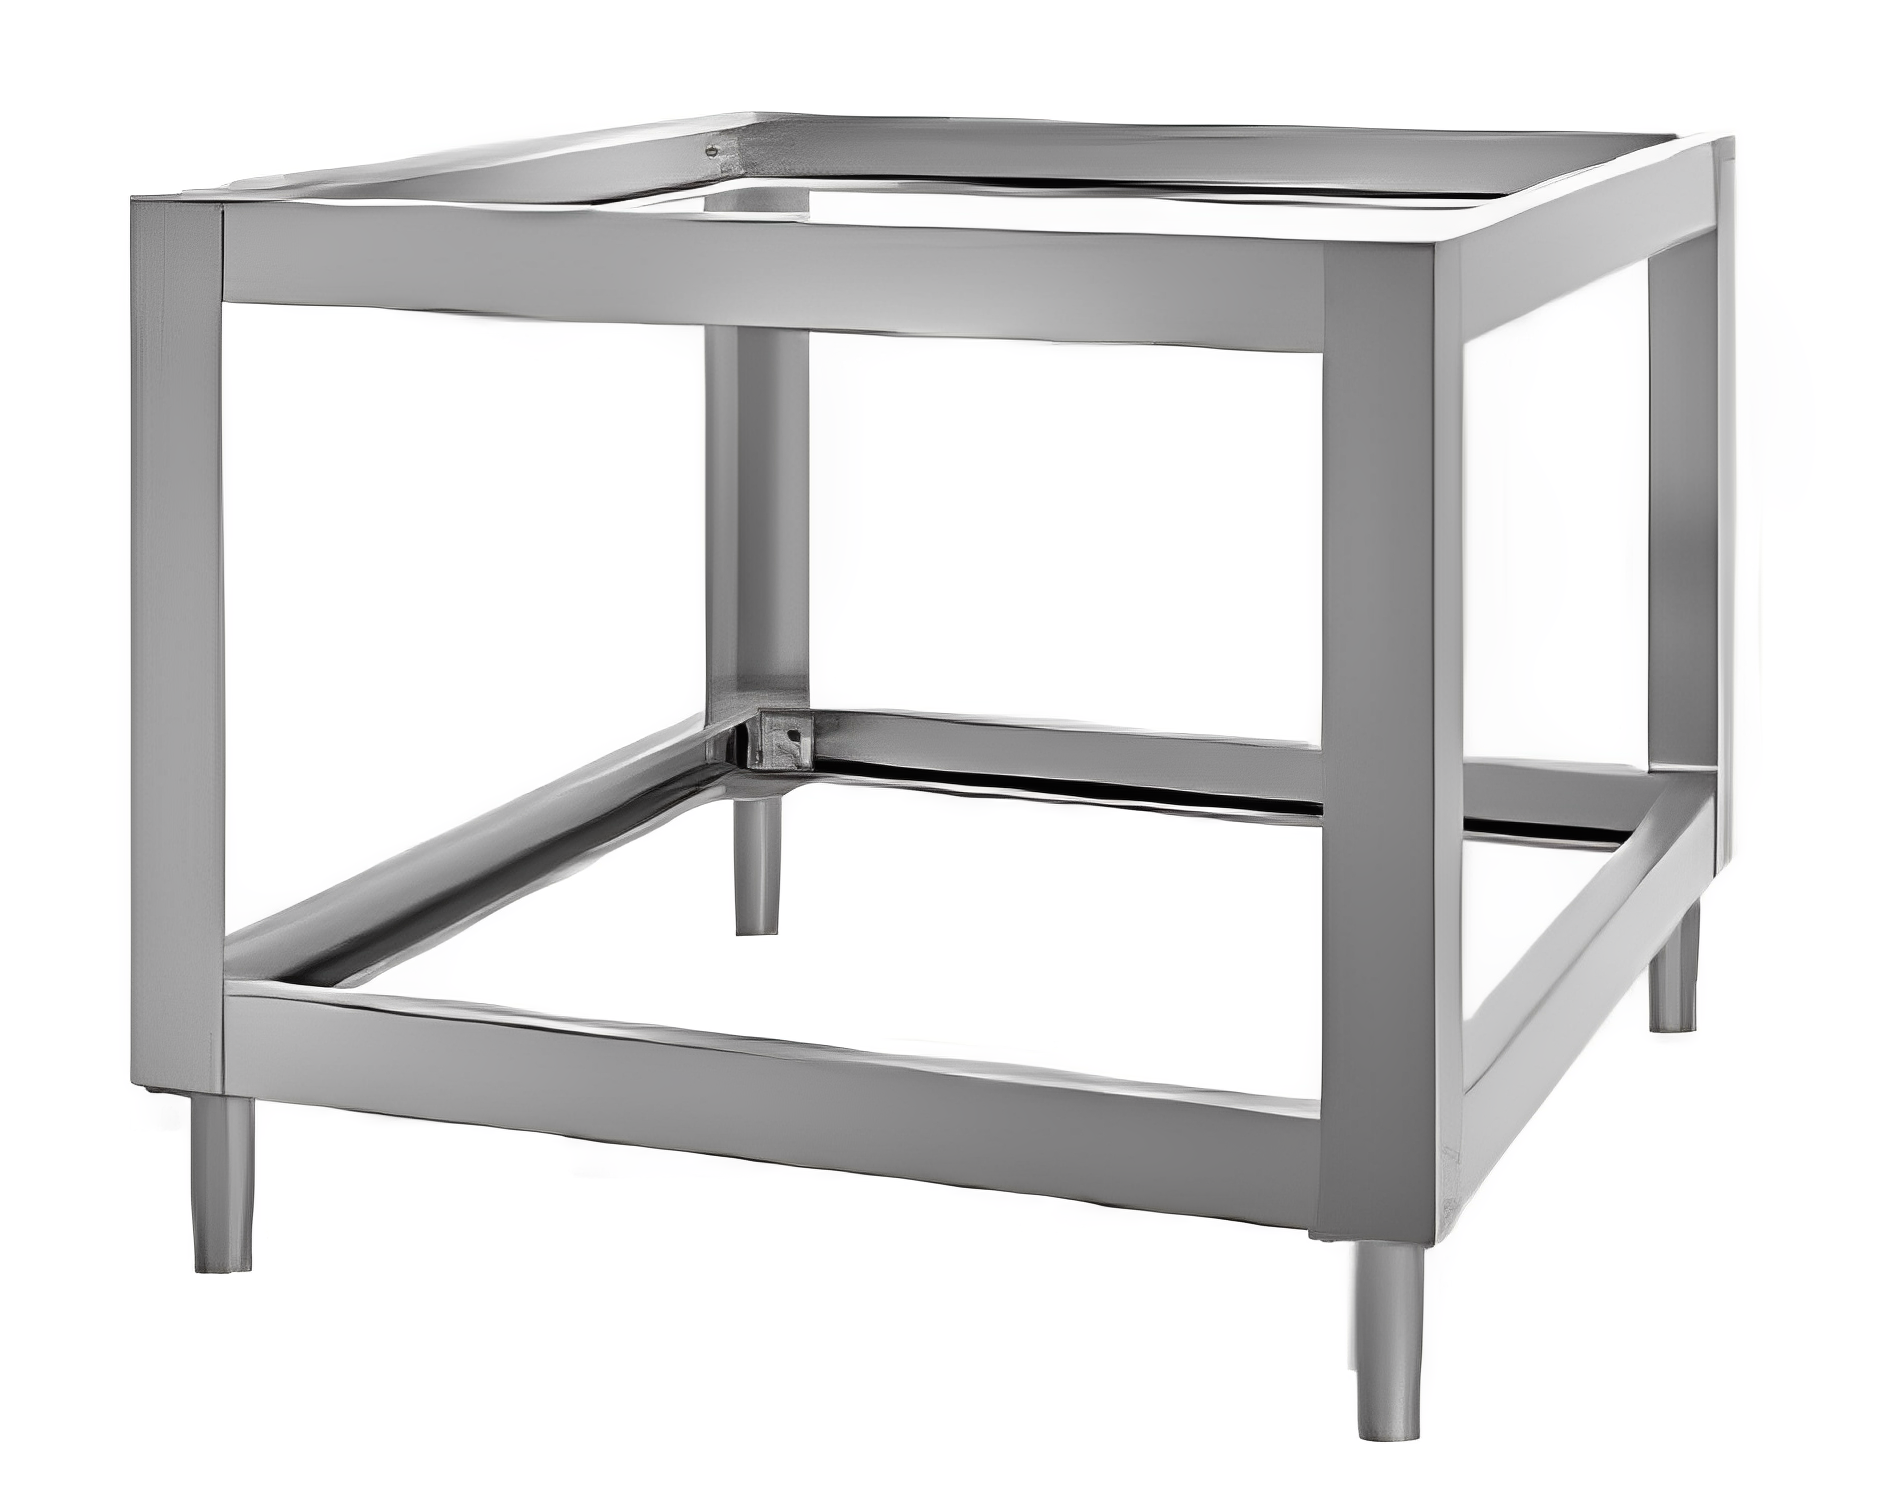 PIZZAGROUP Entry Max S9 Stands in stainless steel